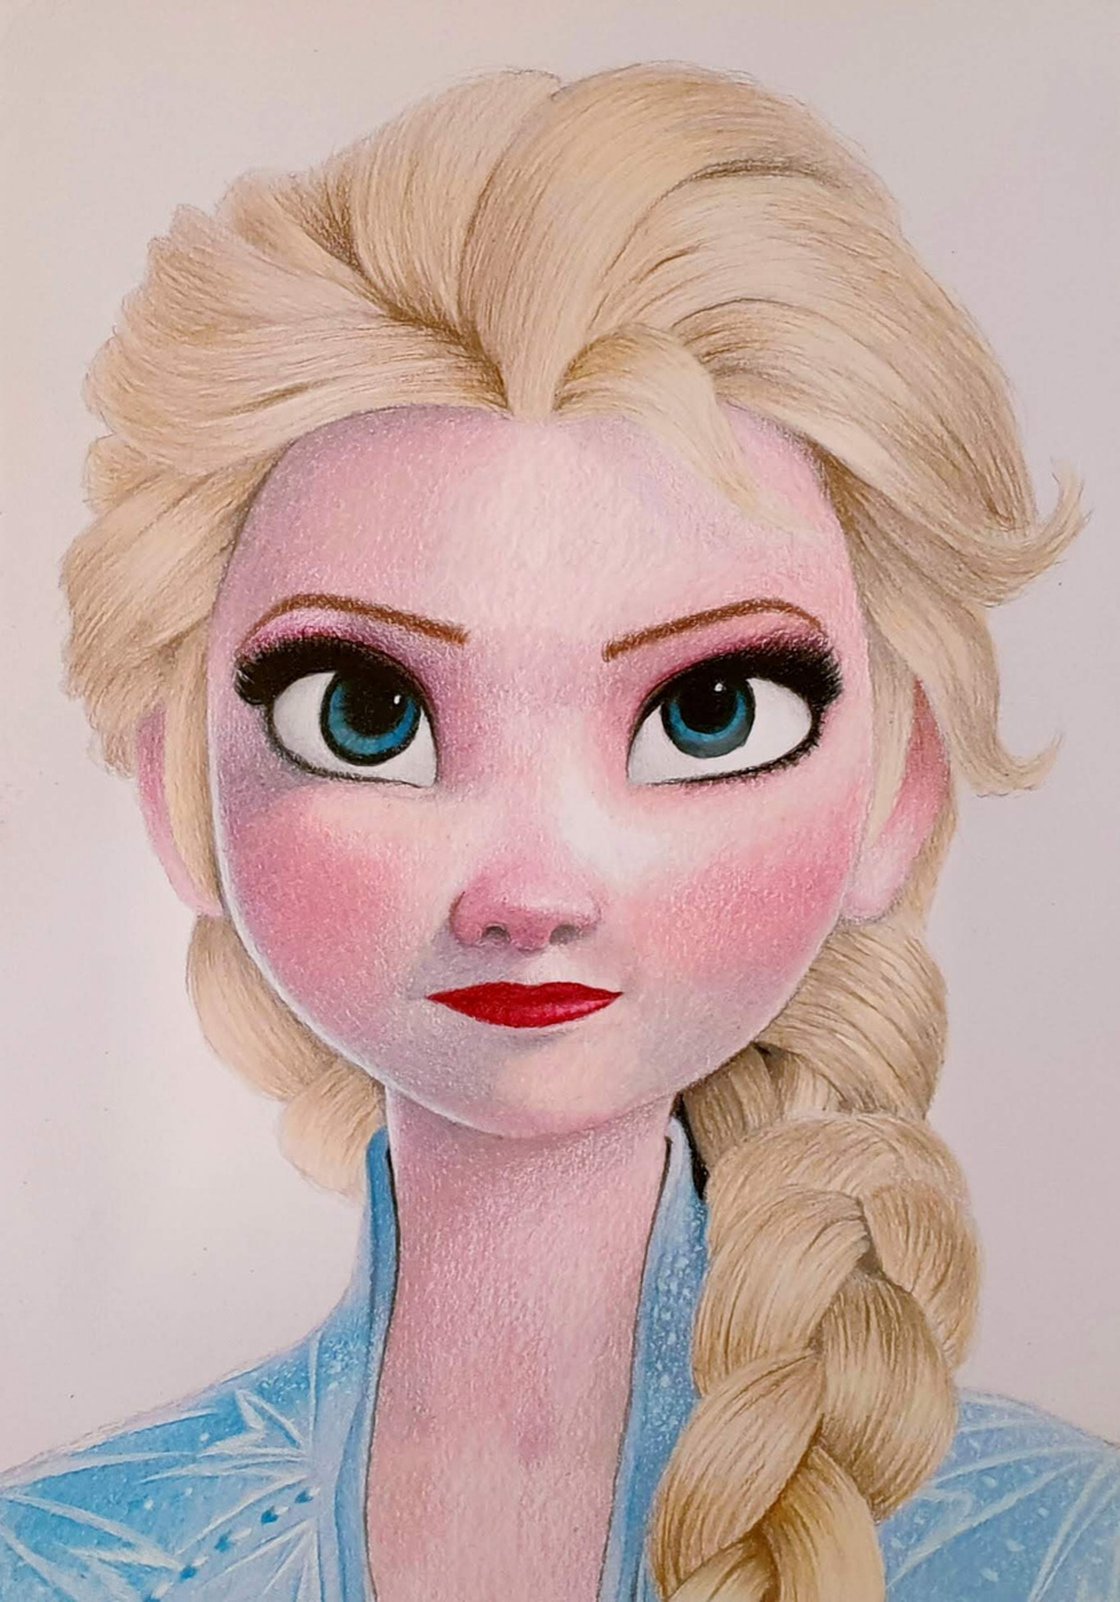 Elsa from Frozen 2 Pencil drawing by Asif Rasheed | Artfinder